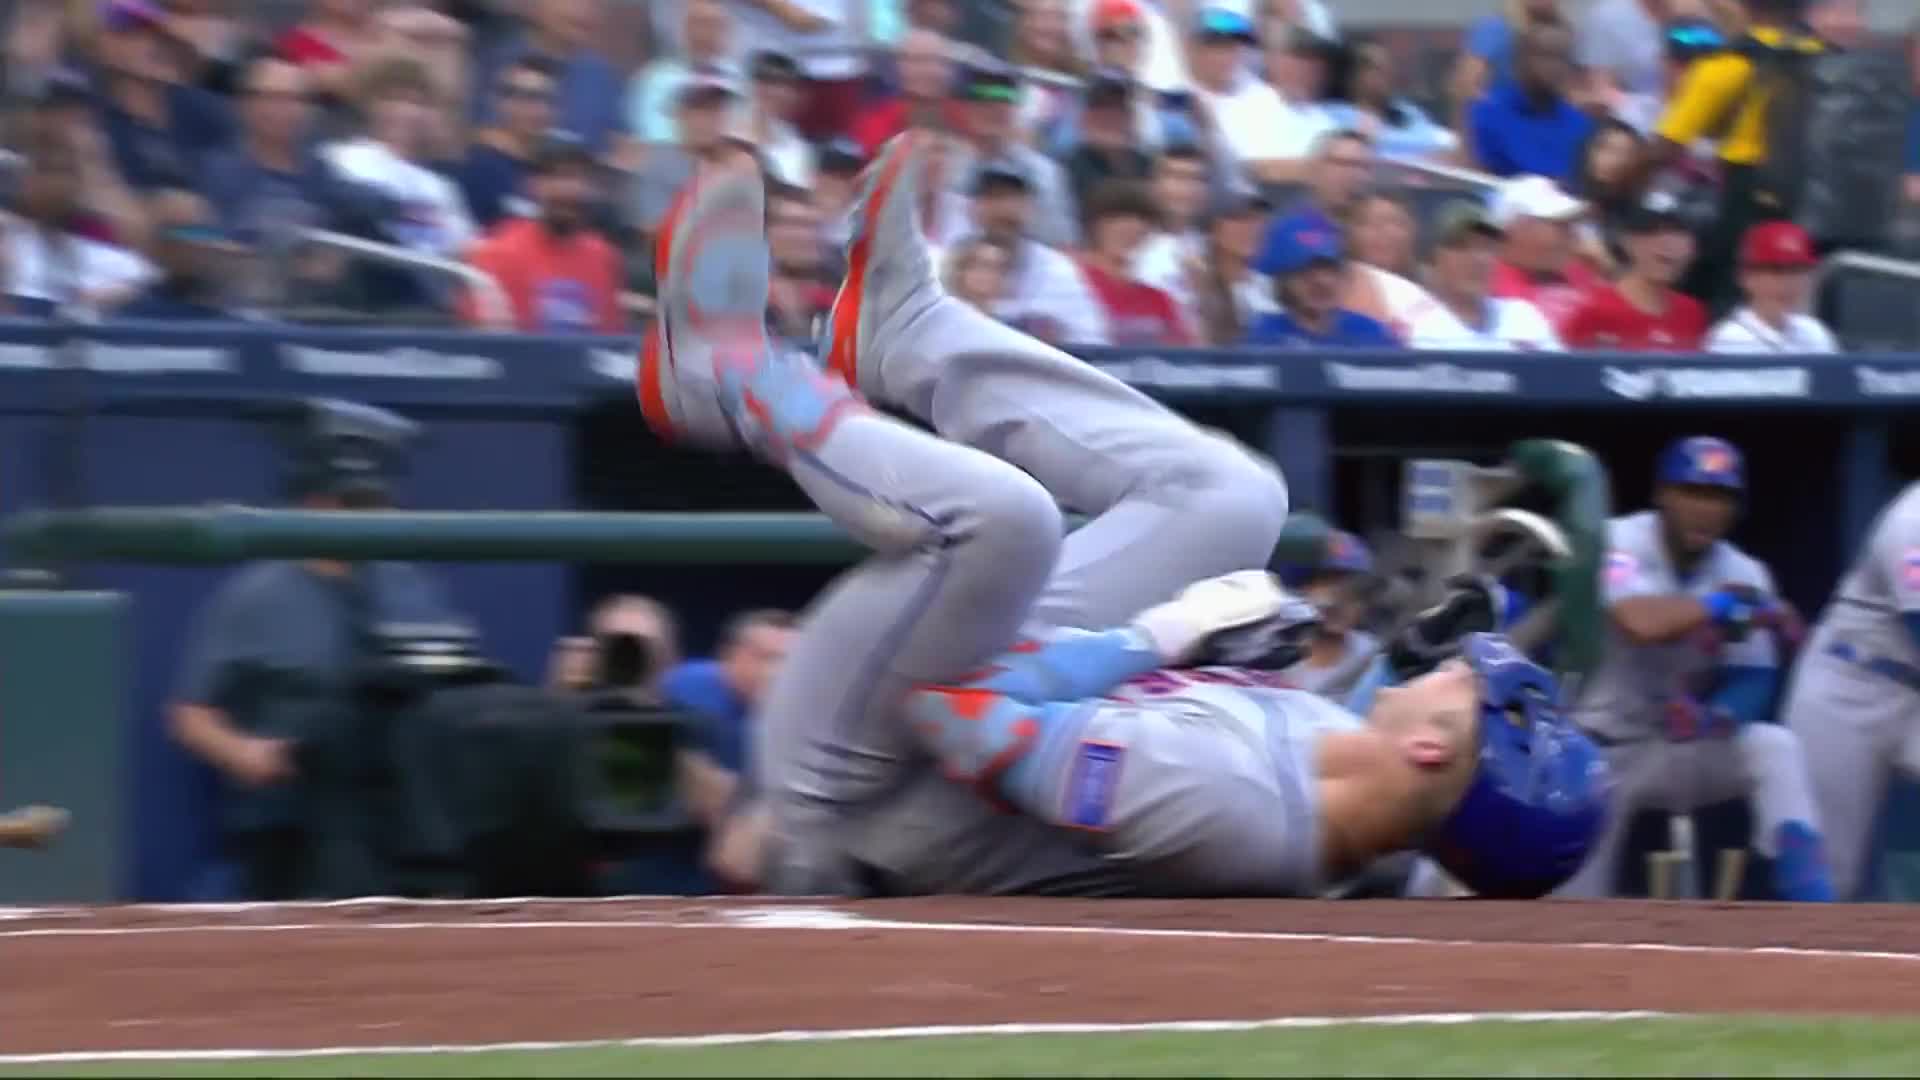 Pete Alonso is hit by a pitch in the wrist and leaves the game in the 1st  inning : r/baseball